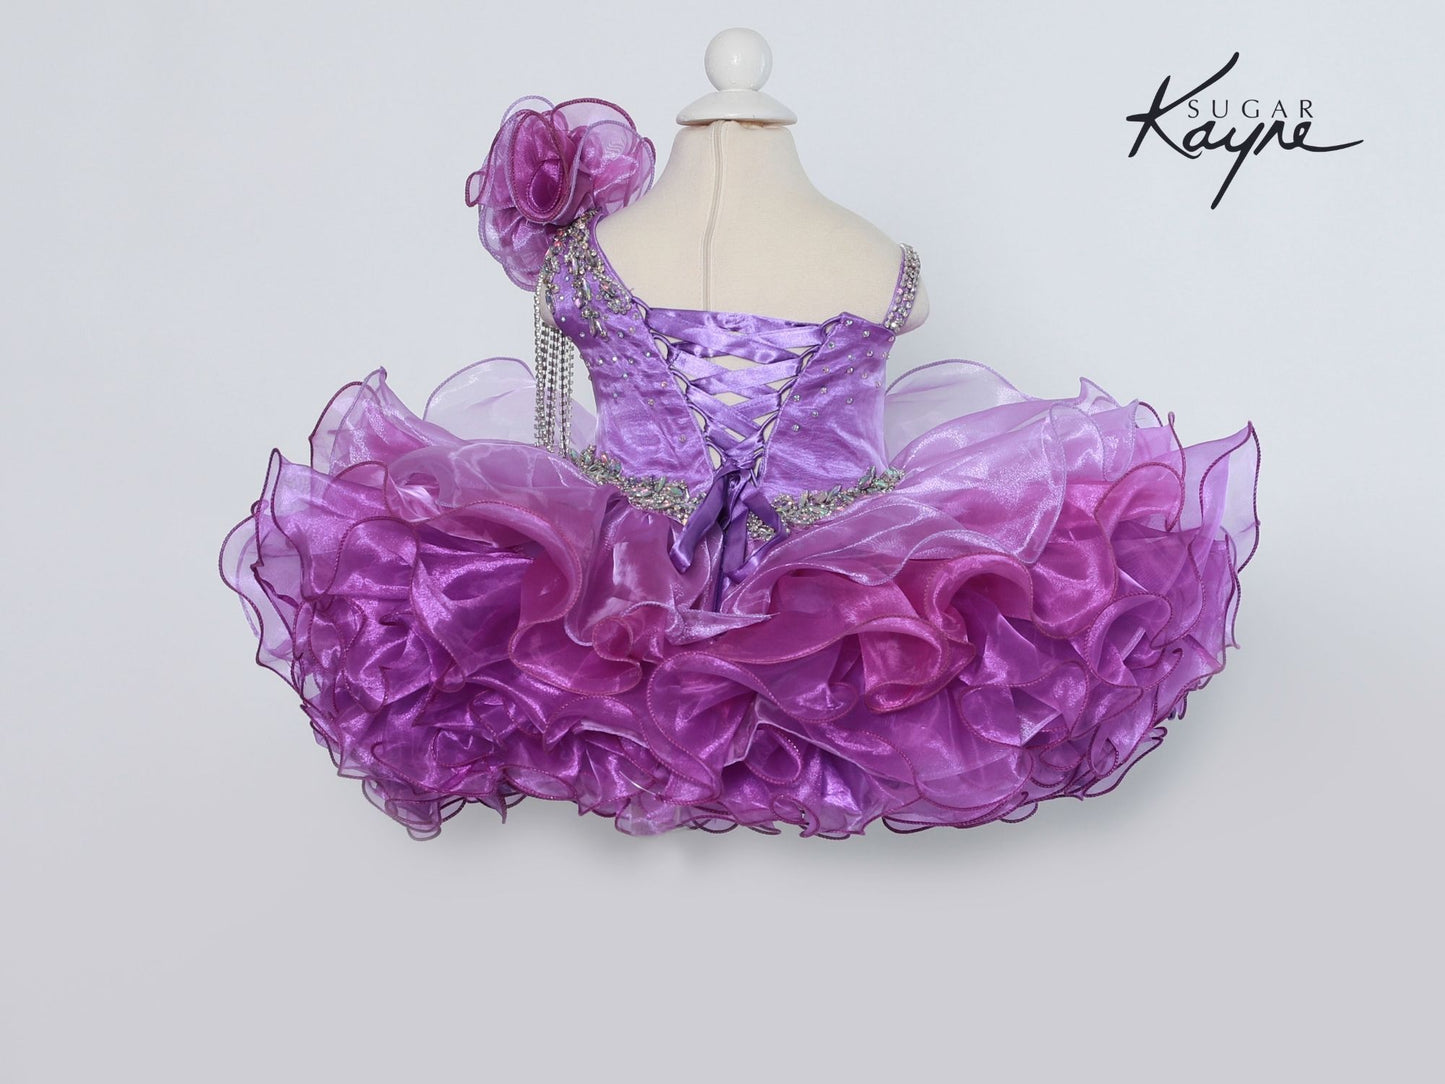 Sugar Kayne C206 One Shoulder Ombre Cupcake Pageant Dress Rhinestone Tassel Formal Gown One Shoulder with an organza embellishments and rhinestone fringe. Corset back lace up. Ombre color shift.  sizes: 0M, 6M, 12M, 18M, 24M, 2T, 3T, 4T, 5T, 6T  Colors: Sunset, Iris